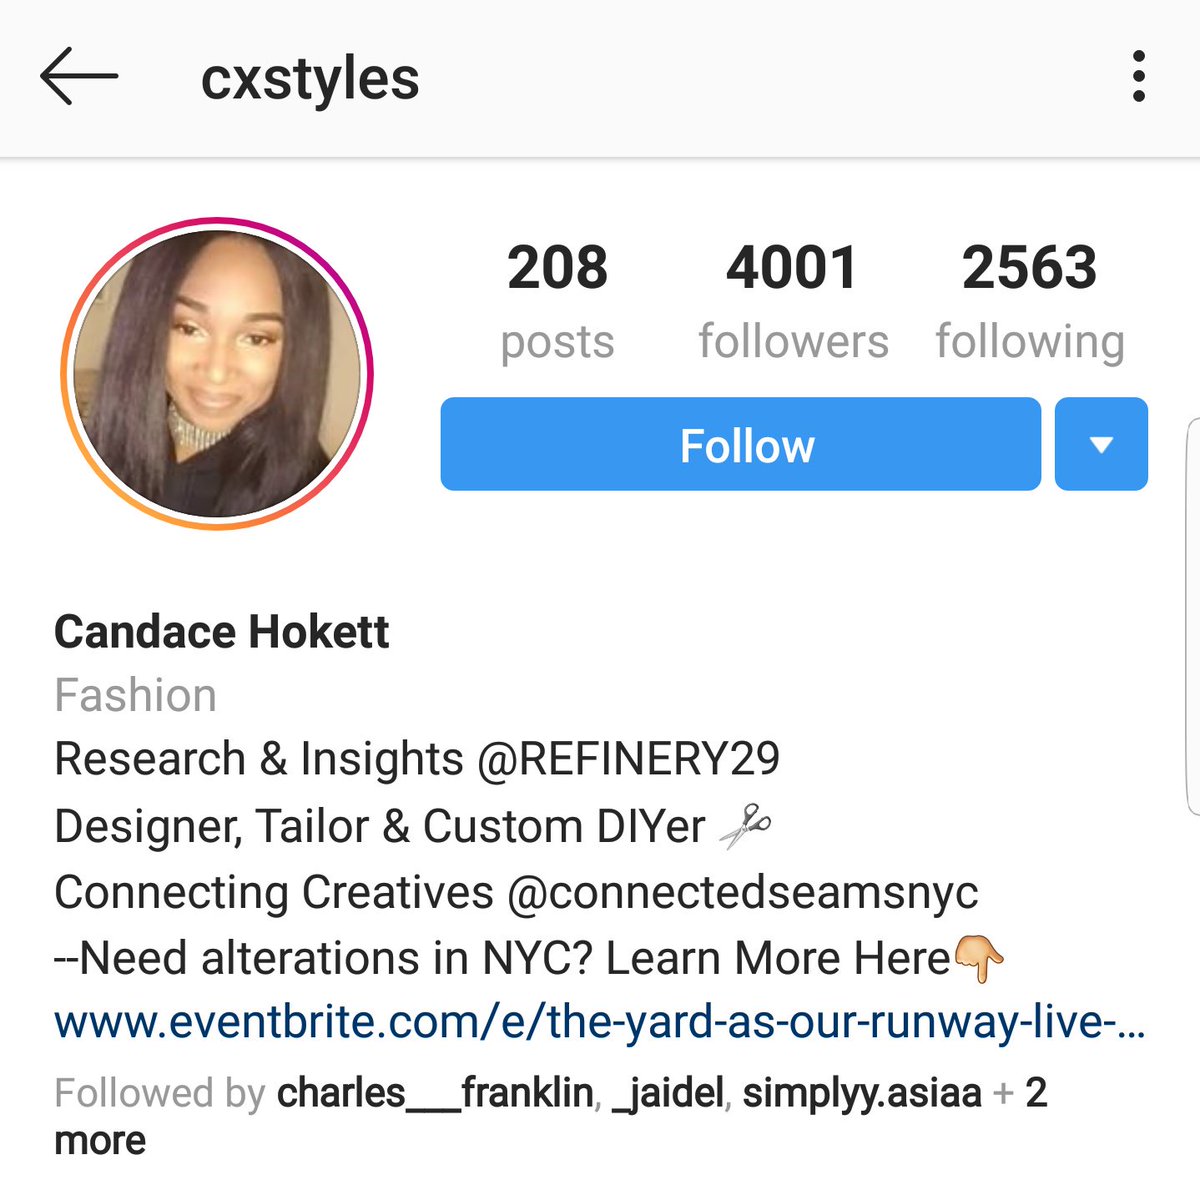 Candace HokettIG: CxstylesResearch & Insights Manager at Refinery29Designer & tailor Founder of connectedseamsnyc